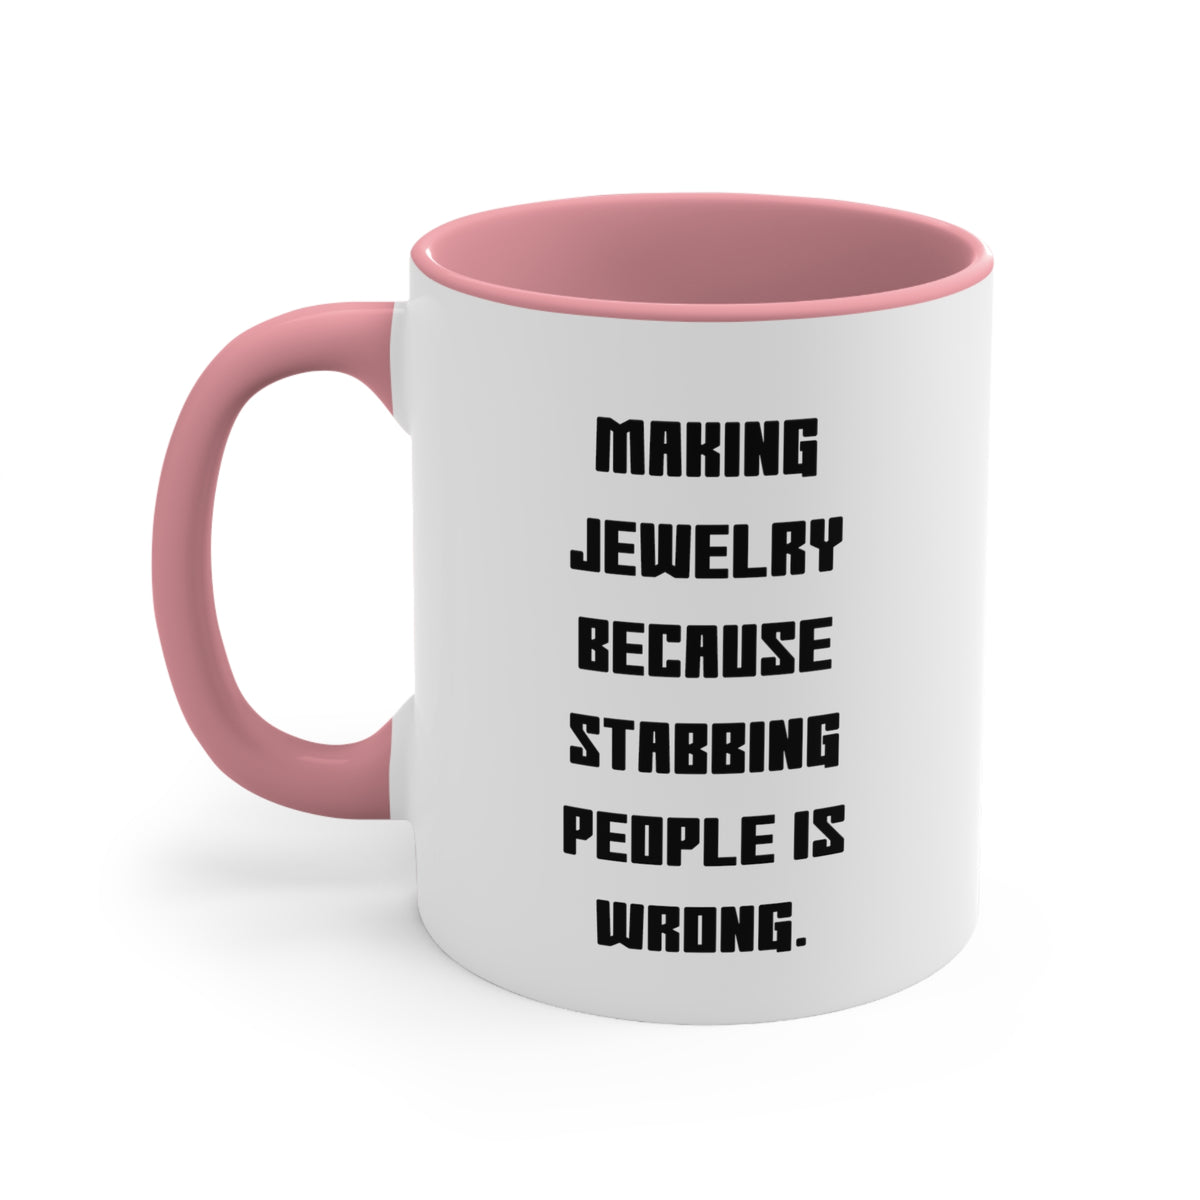 Fun Jewelry Making Two Tone 11oz Mug, Making Jewelry Because, Gifts For Friends, Present From Friends, Cup For Jewelry Making, Jewelry making supplies, Gift ideas for jewelry makers, Tools for jewelry